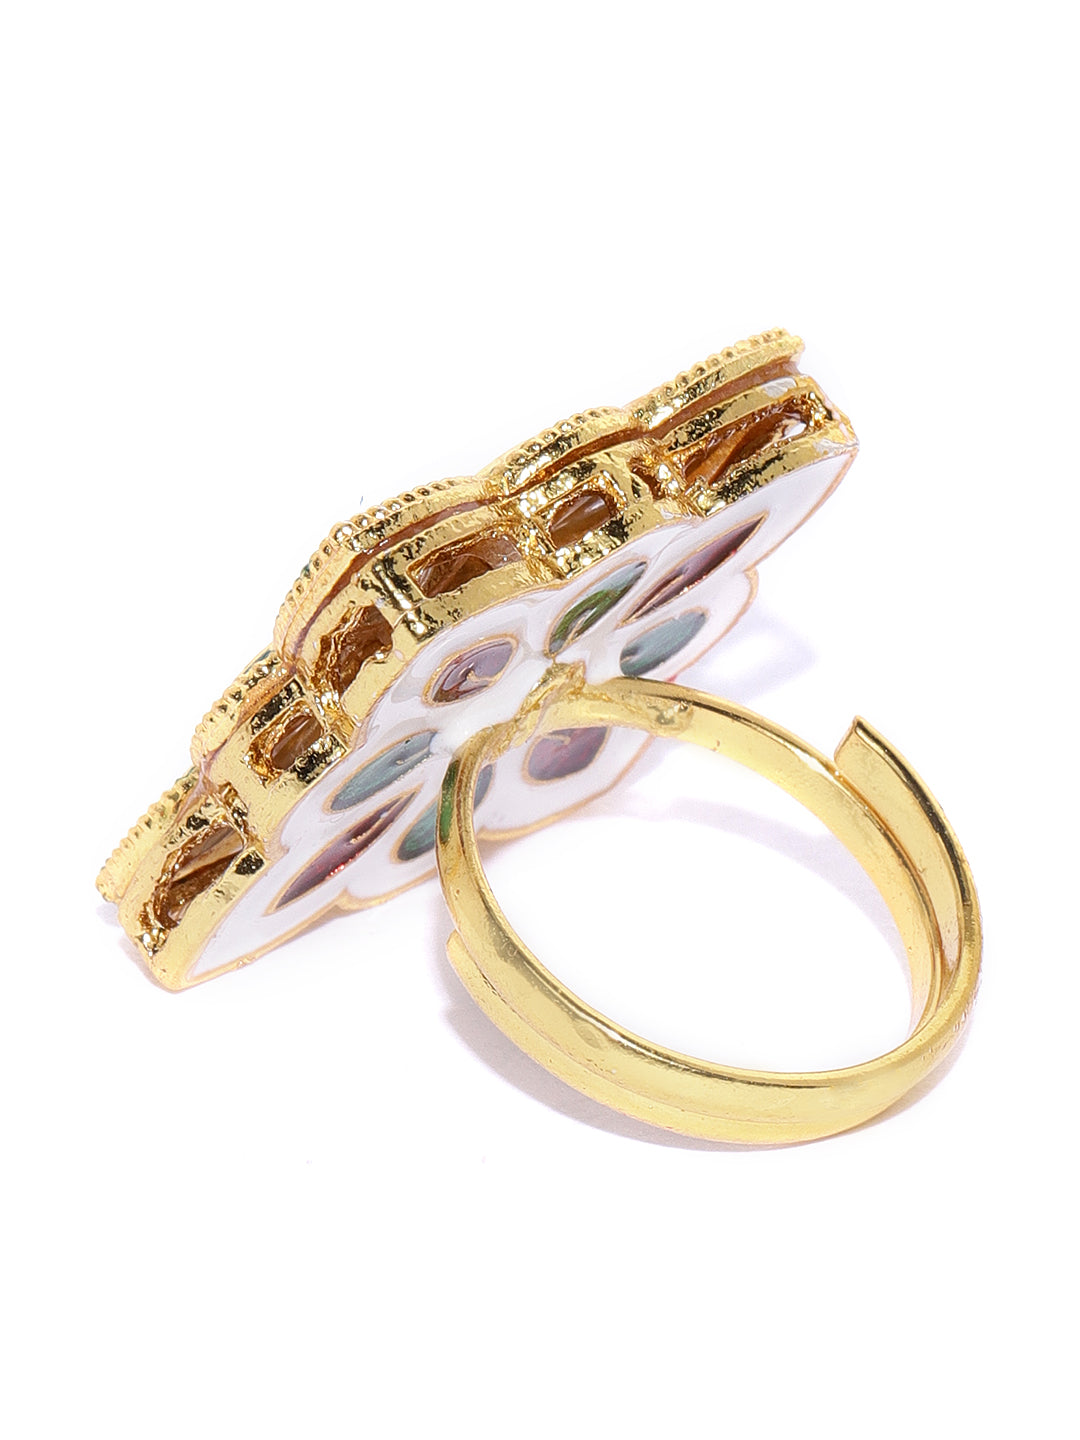 Gold-Plated Kundan Ring in Floral Pattern